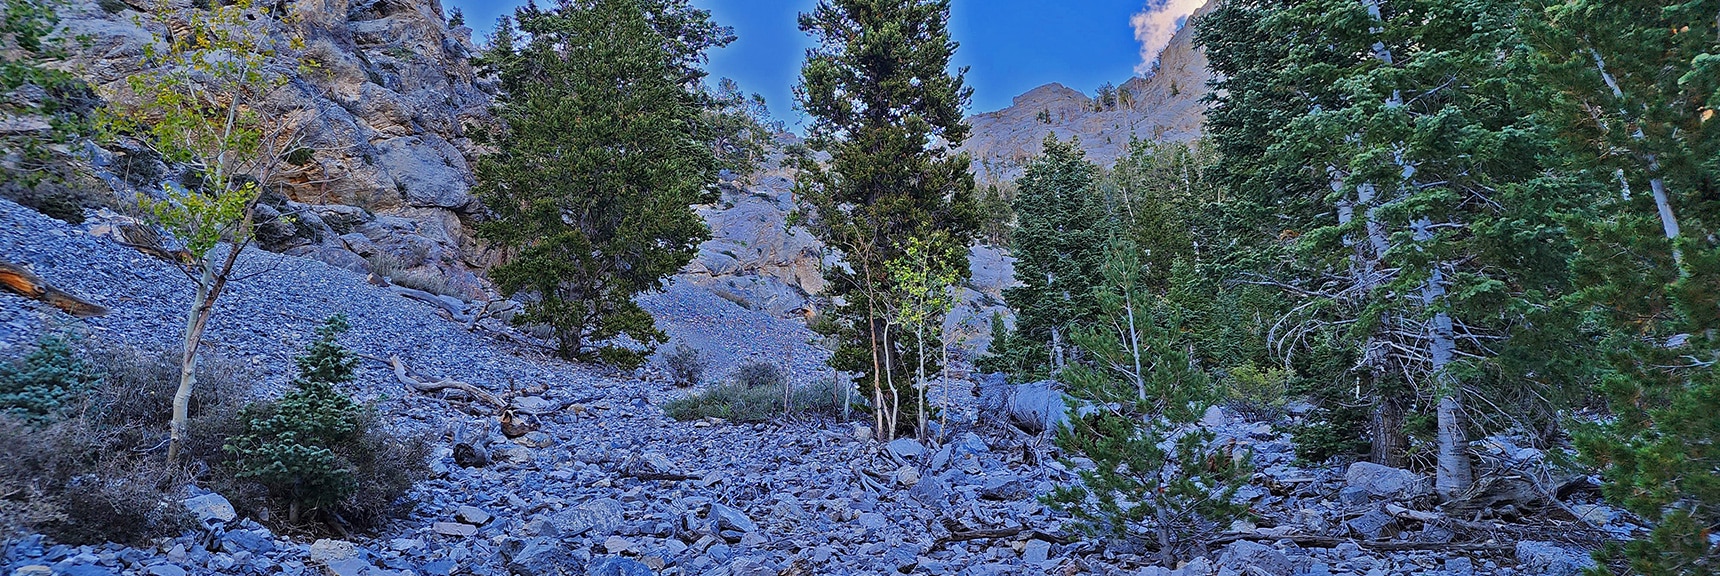 Still, a Beautiful Untouched Forested Area, But Strangely, No Cairns or Trail Markings | Mummy Mountain Head from Lee Canyon Road | Mt Charleston Wilderness | Spring Mountains, Nevada